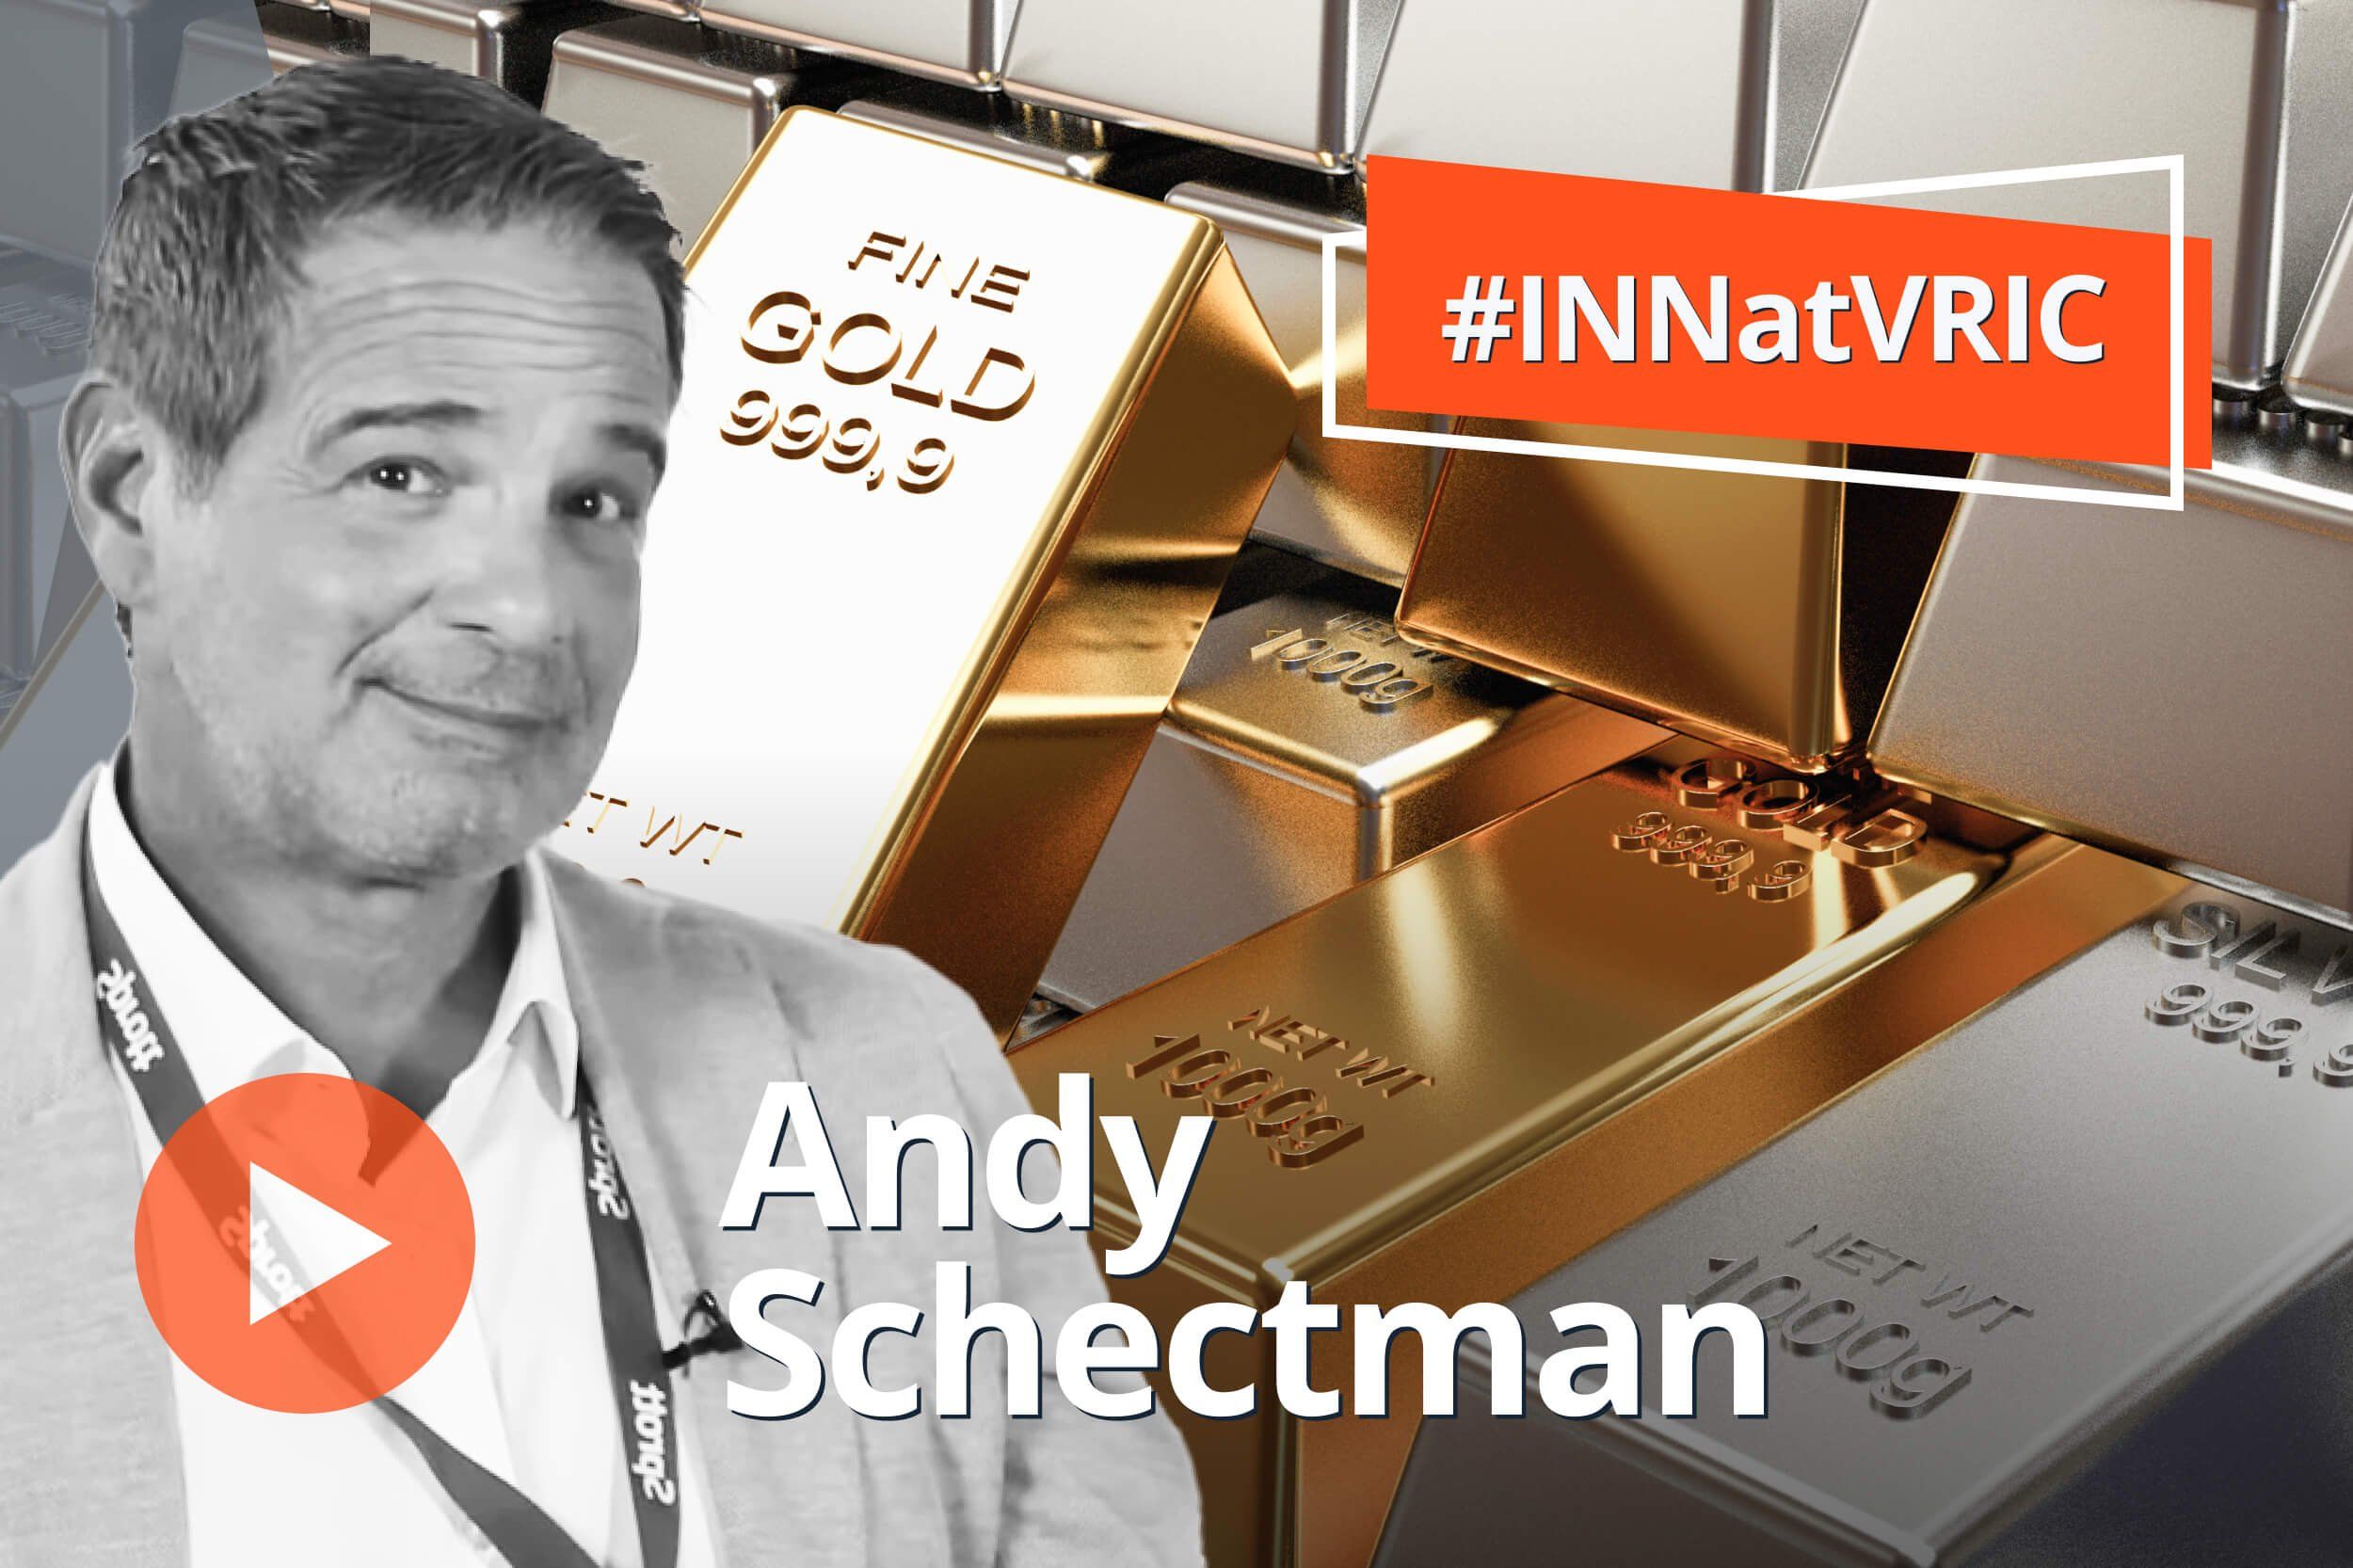 andy schectman, gold and silver bars